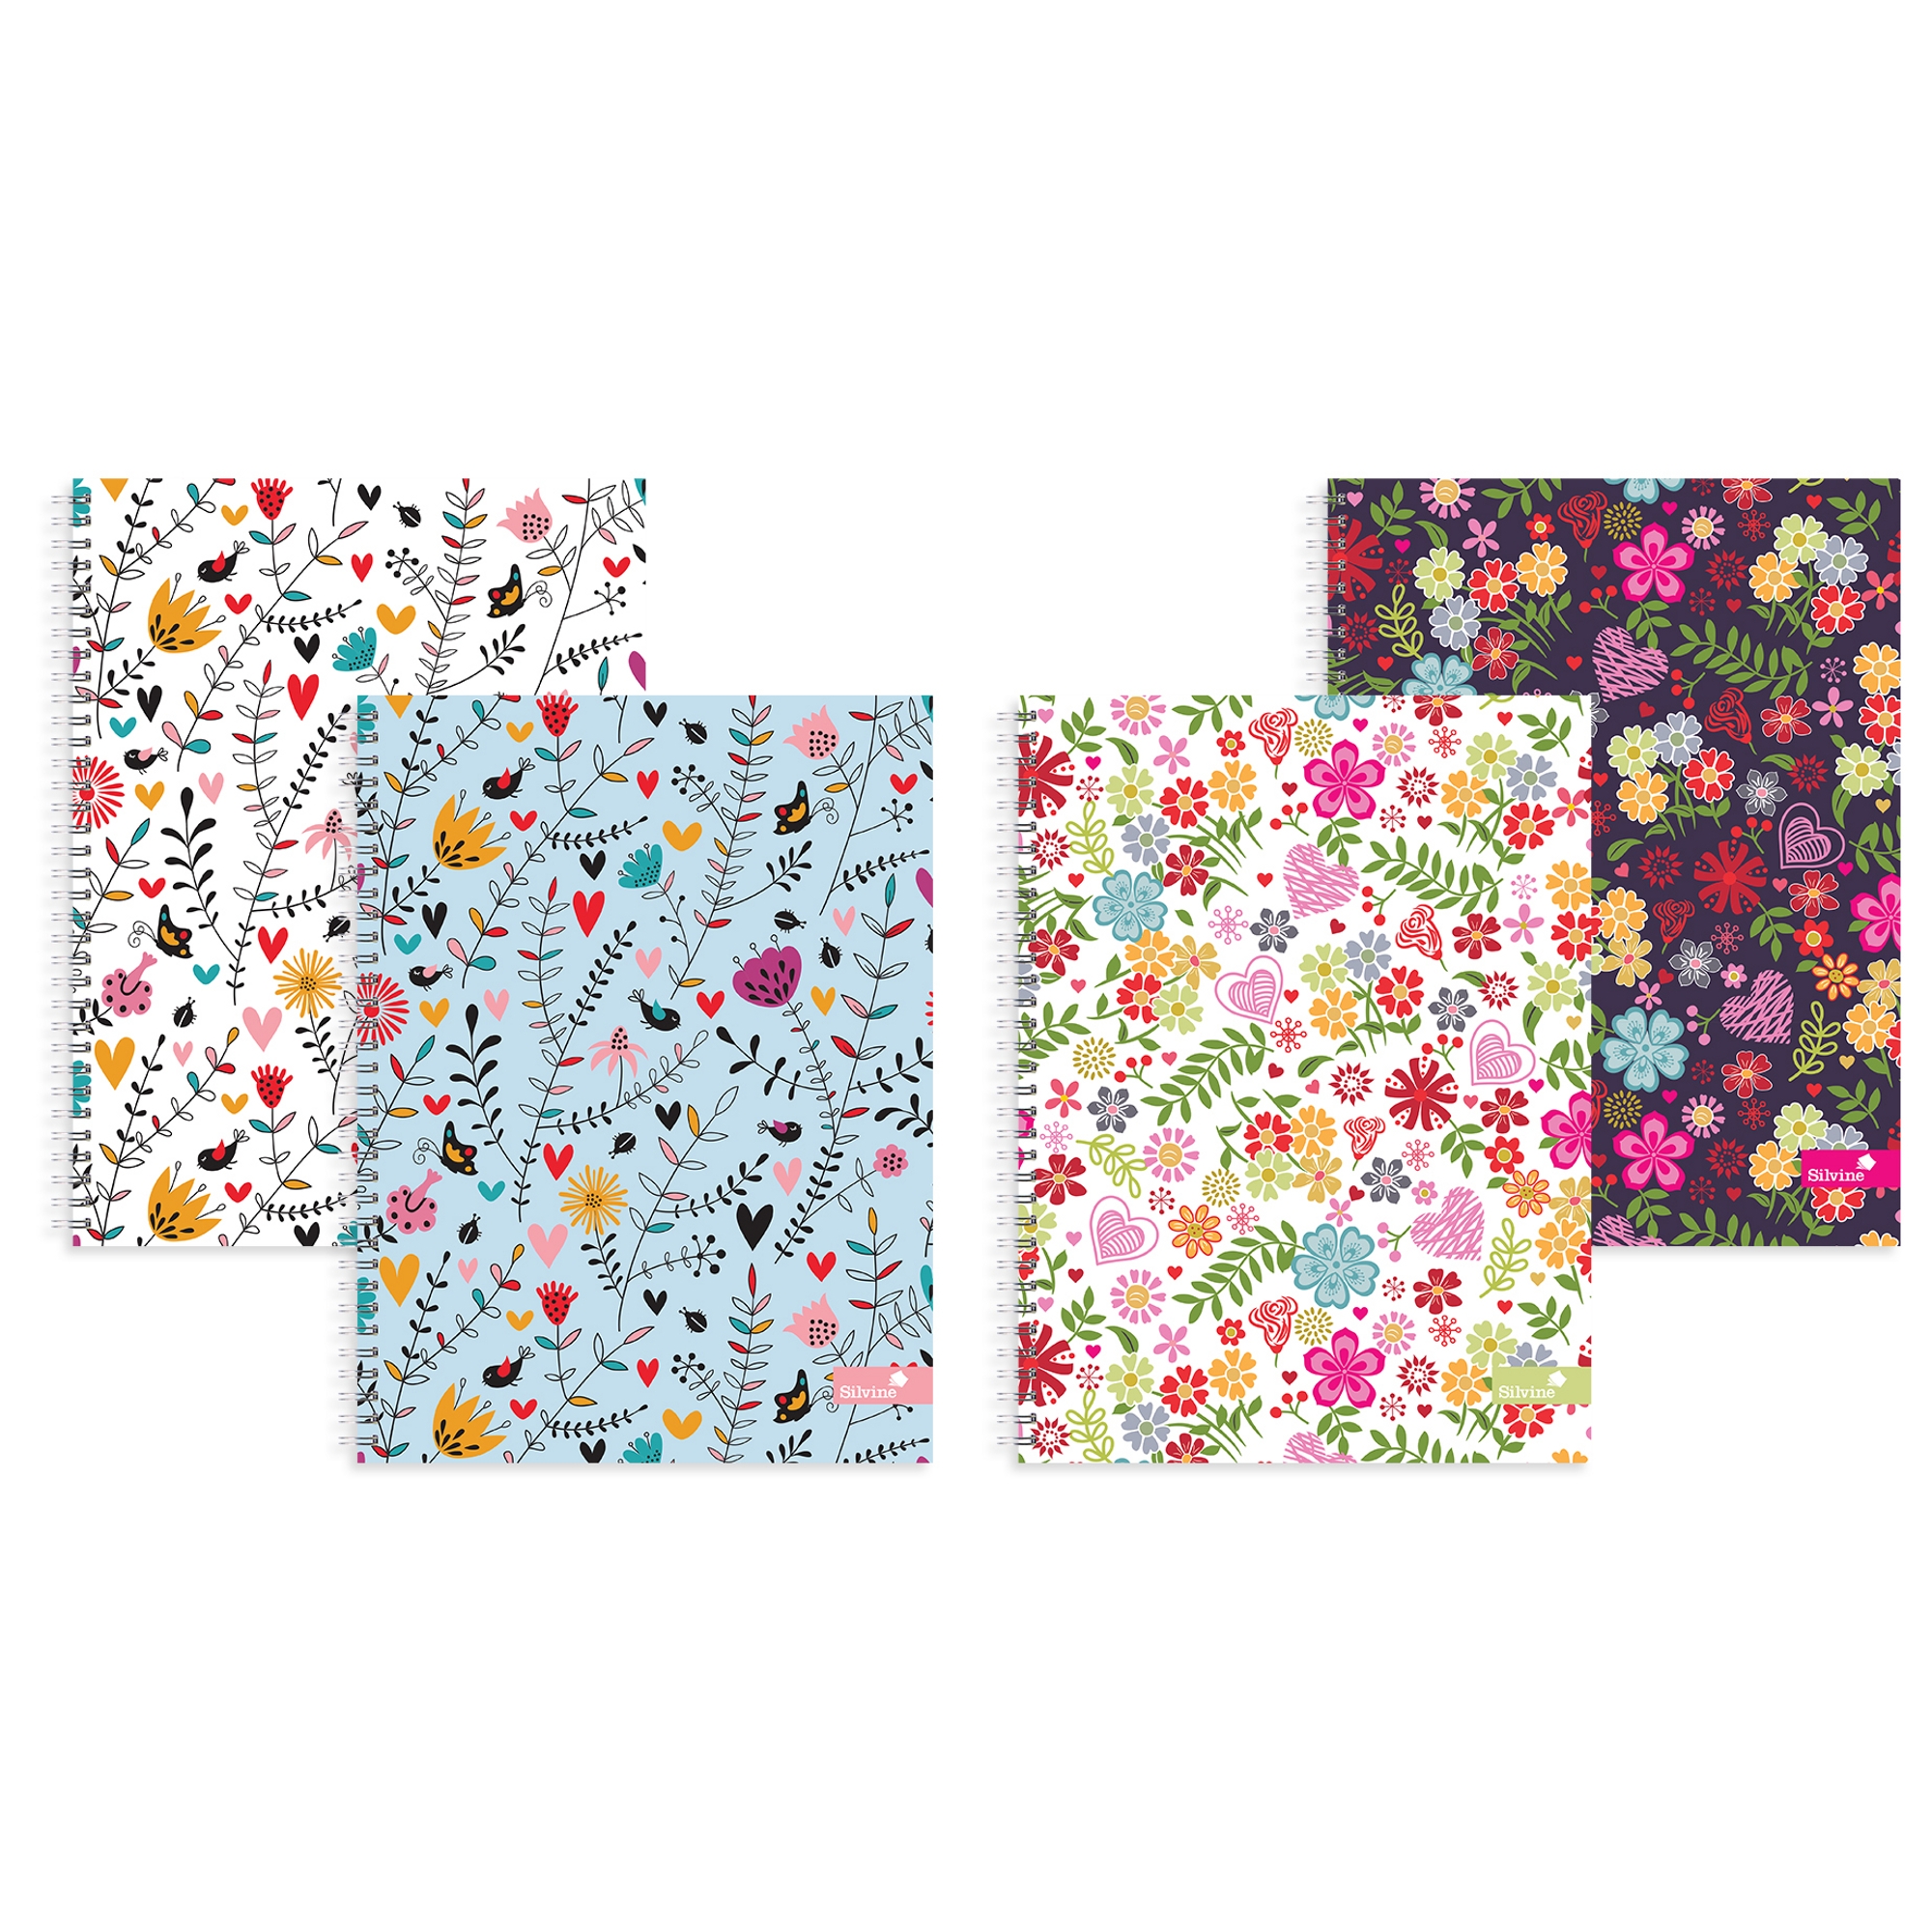 A4 Floral Notebook Assorted - Pack of 4